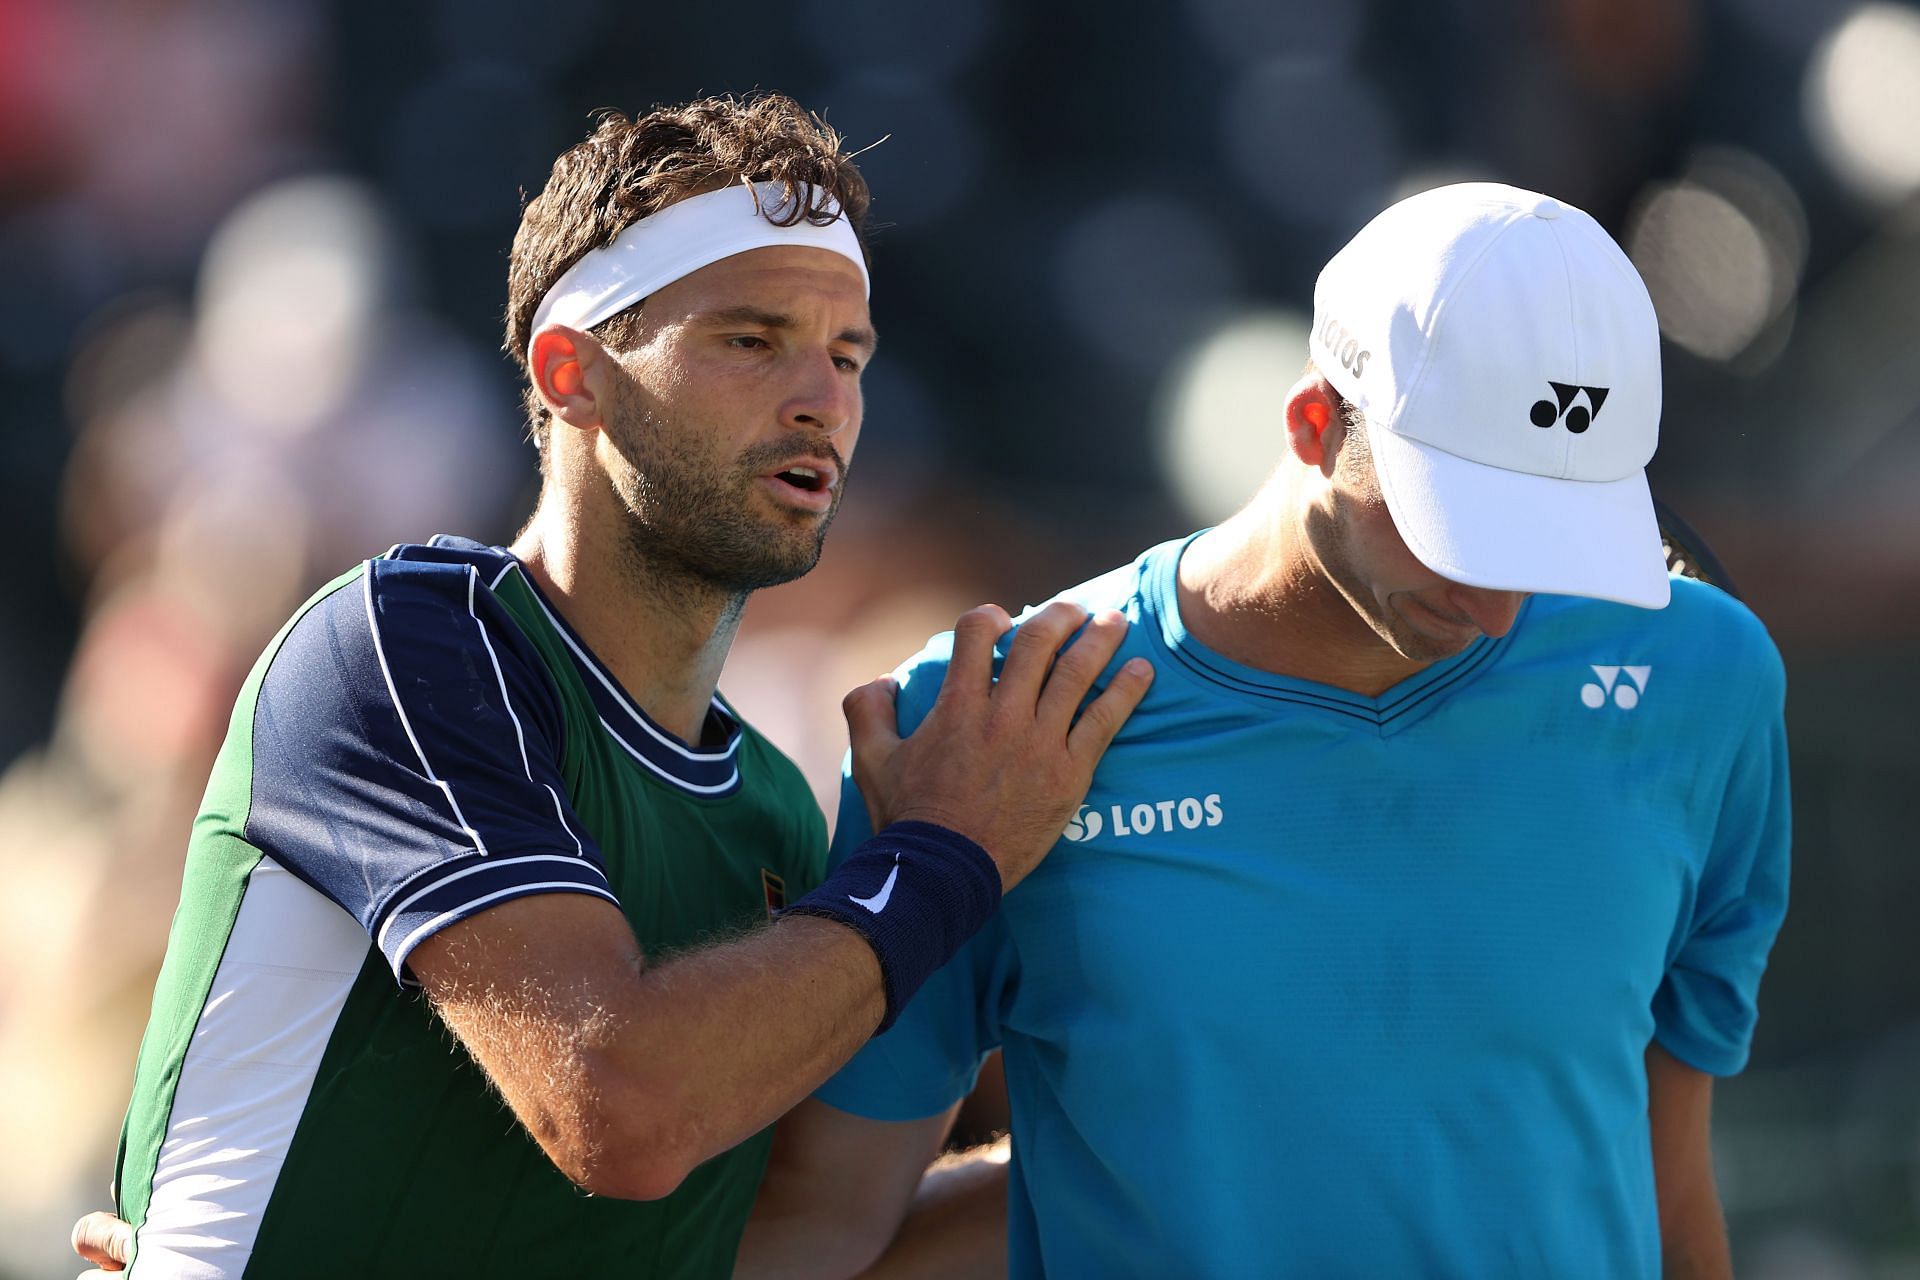 Grigor Dimitrov and Hubert Hurkacz have faced each other four times on the tour.